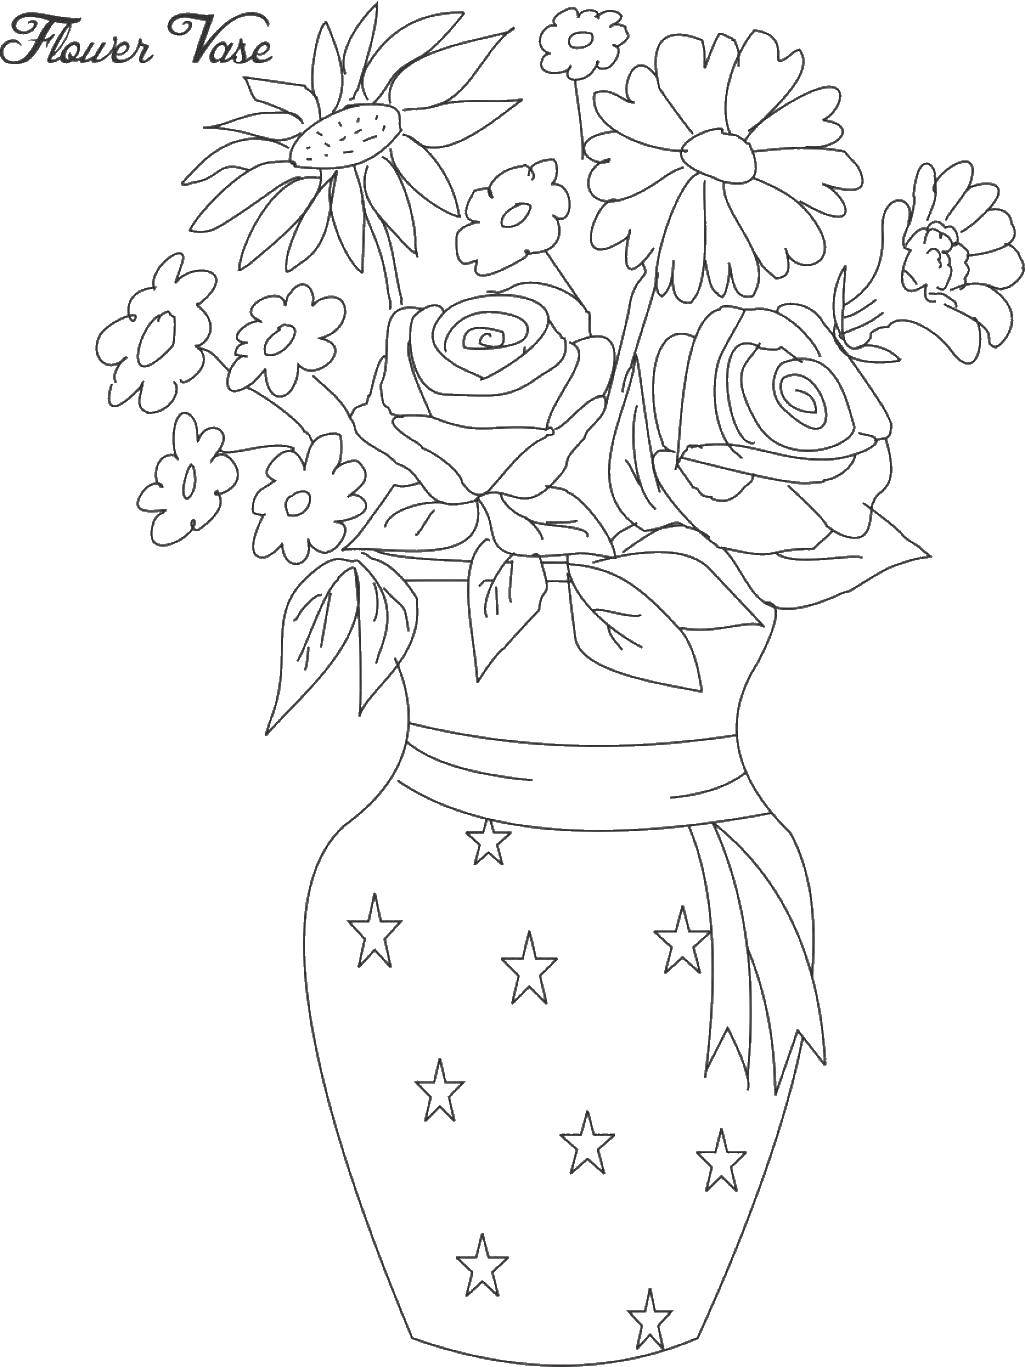 Coloring Roses and other flowers. Category Vase. Tags:  Flowers, bouquet, vase.